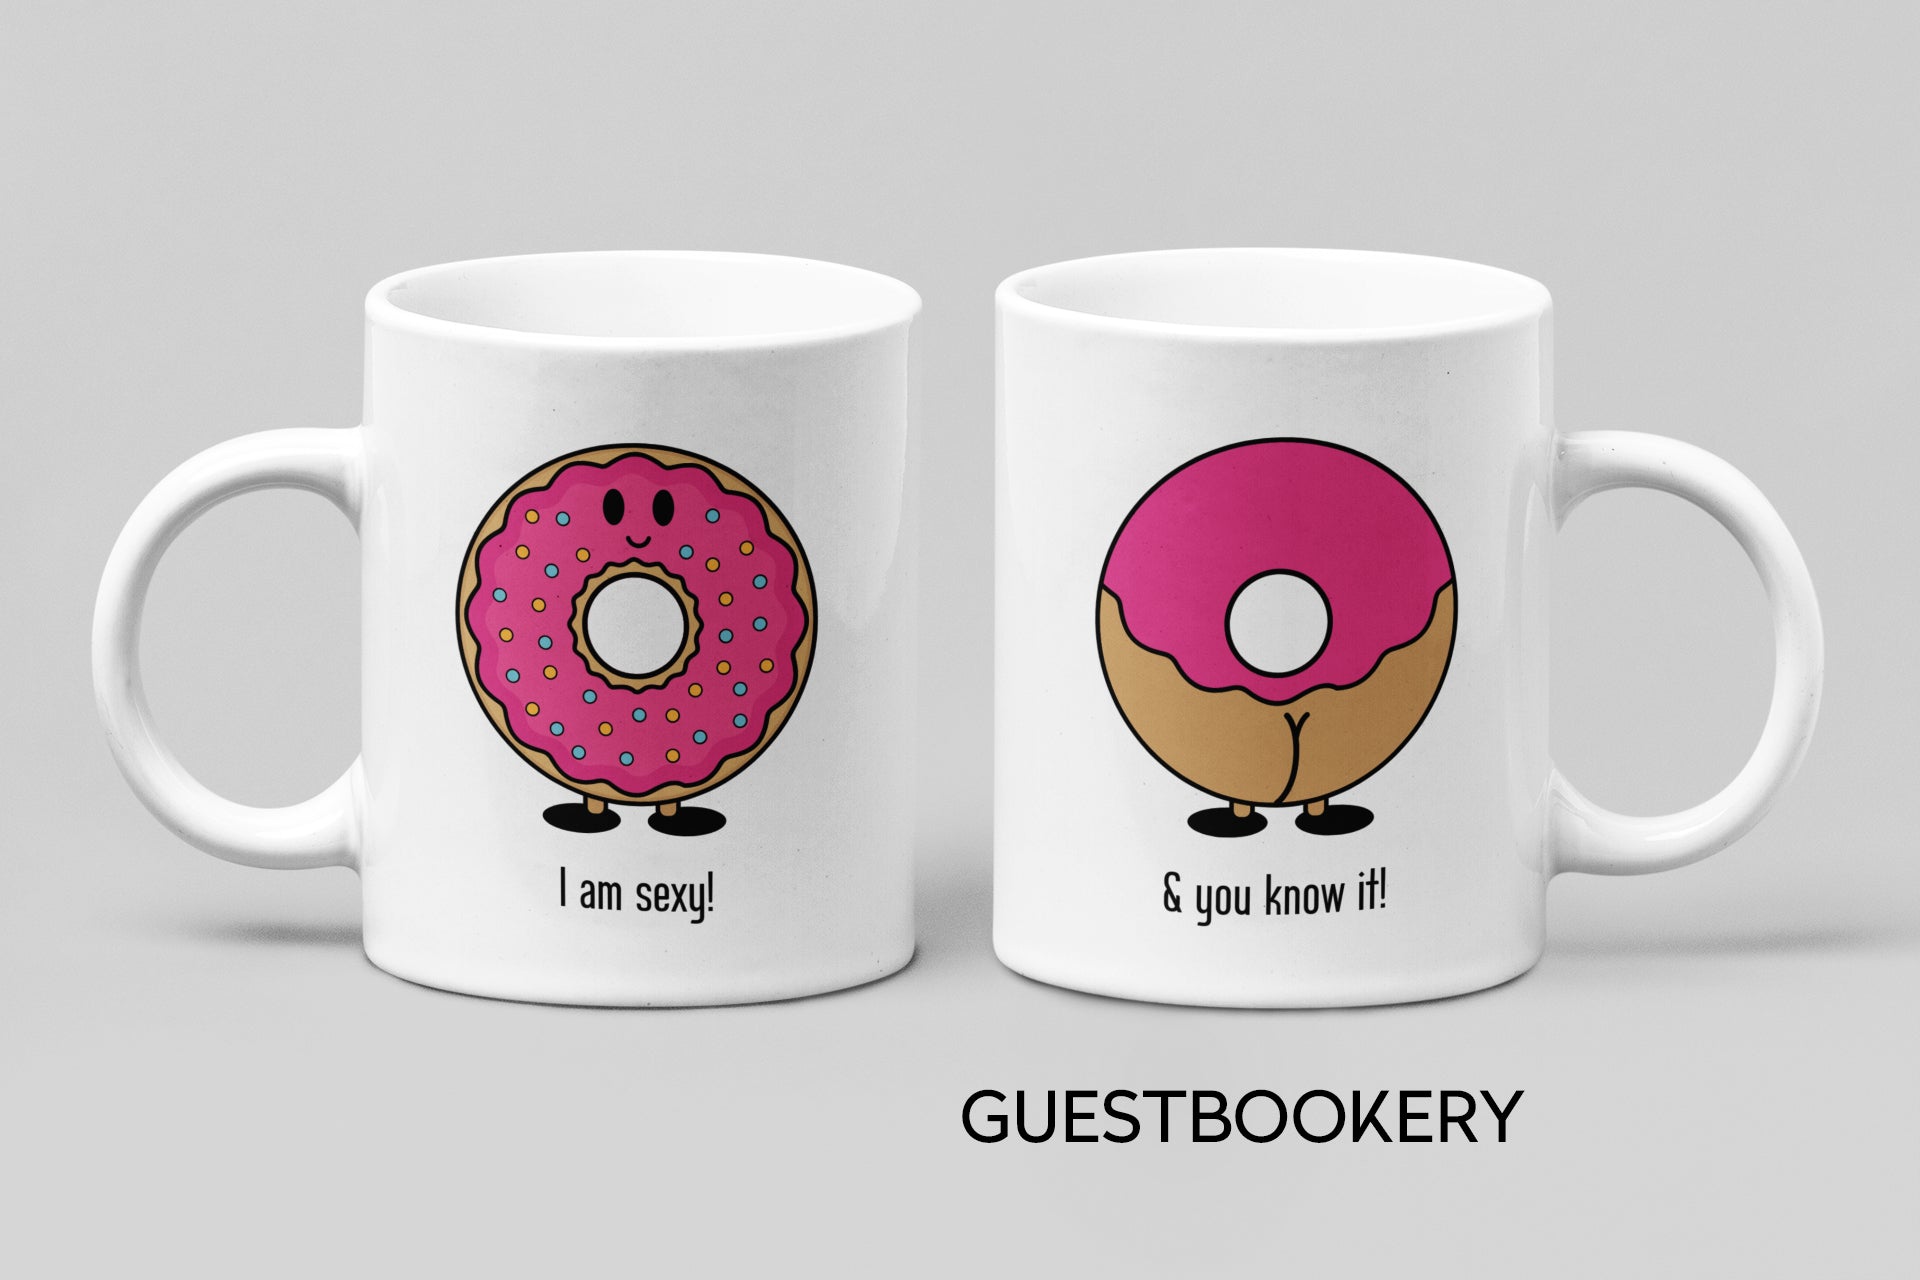 Donuts Mug - I am sexy and you know it